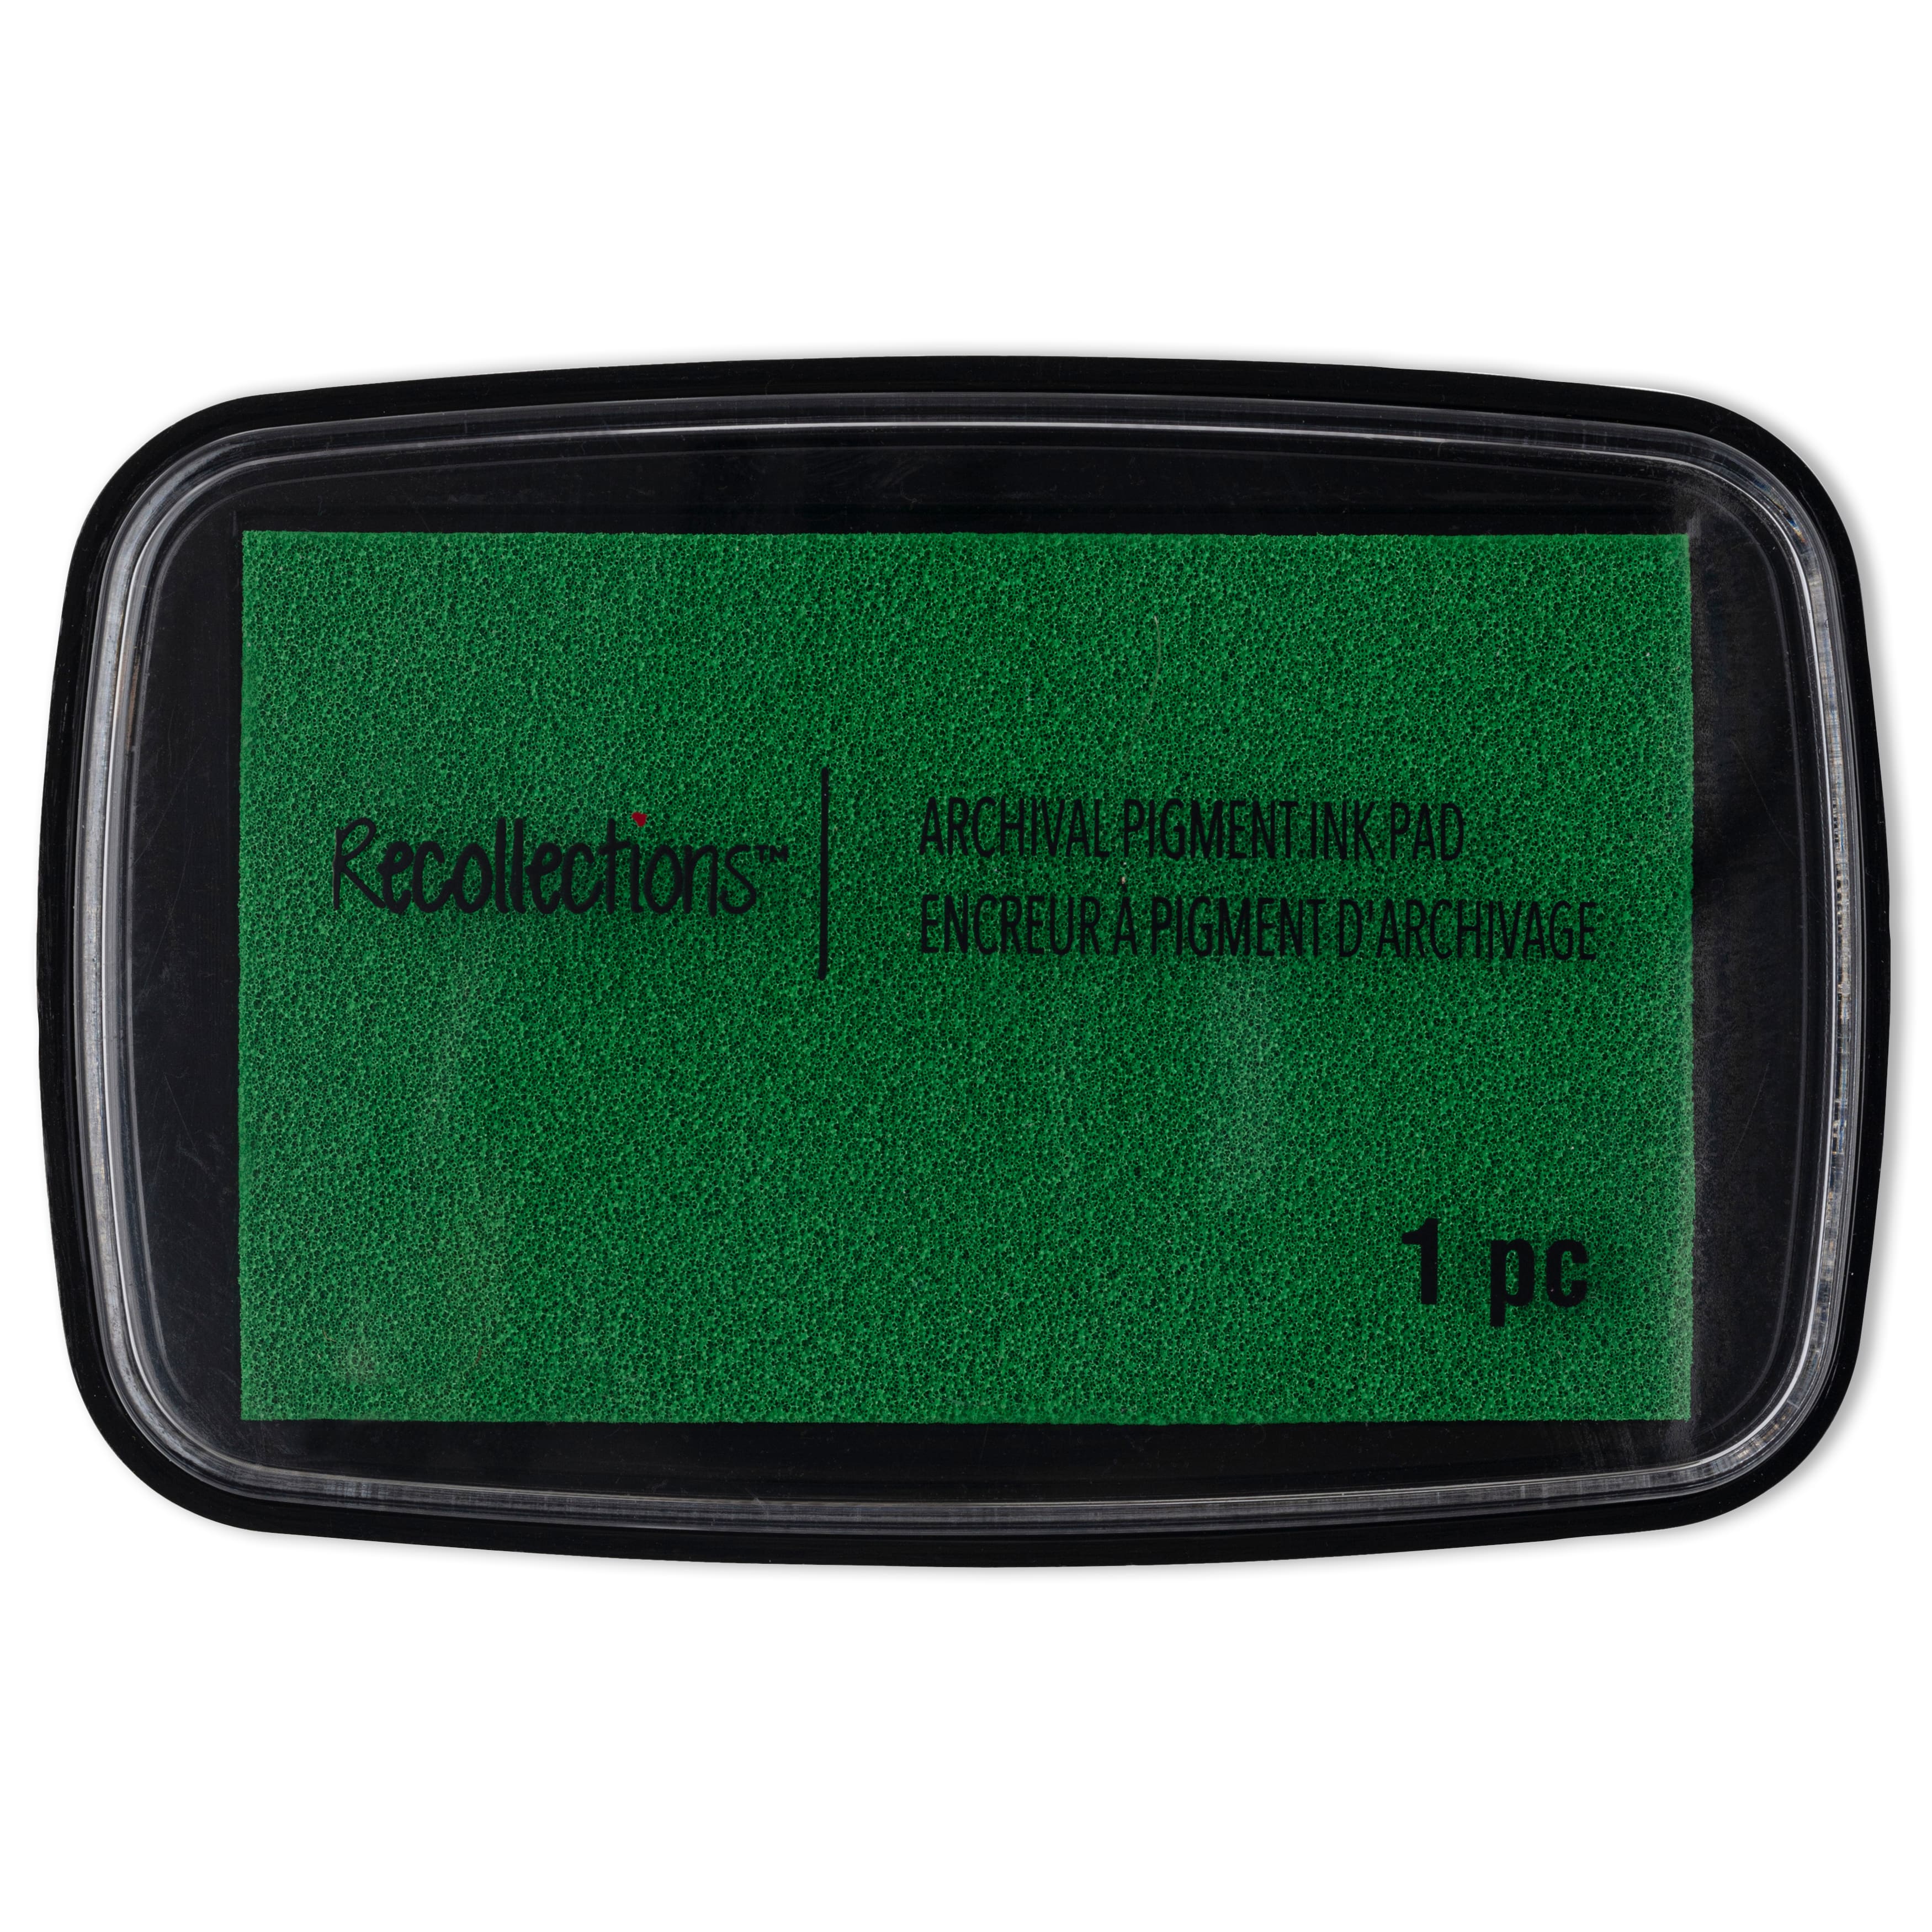 Jacquard Colorpad Pigment Ink Pad - Fresh Green - Scrapbooking Made Simple